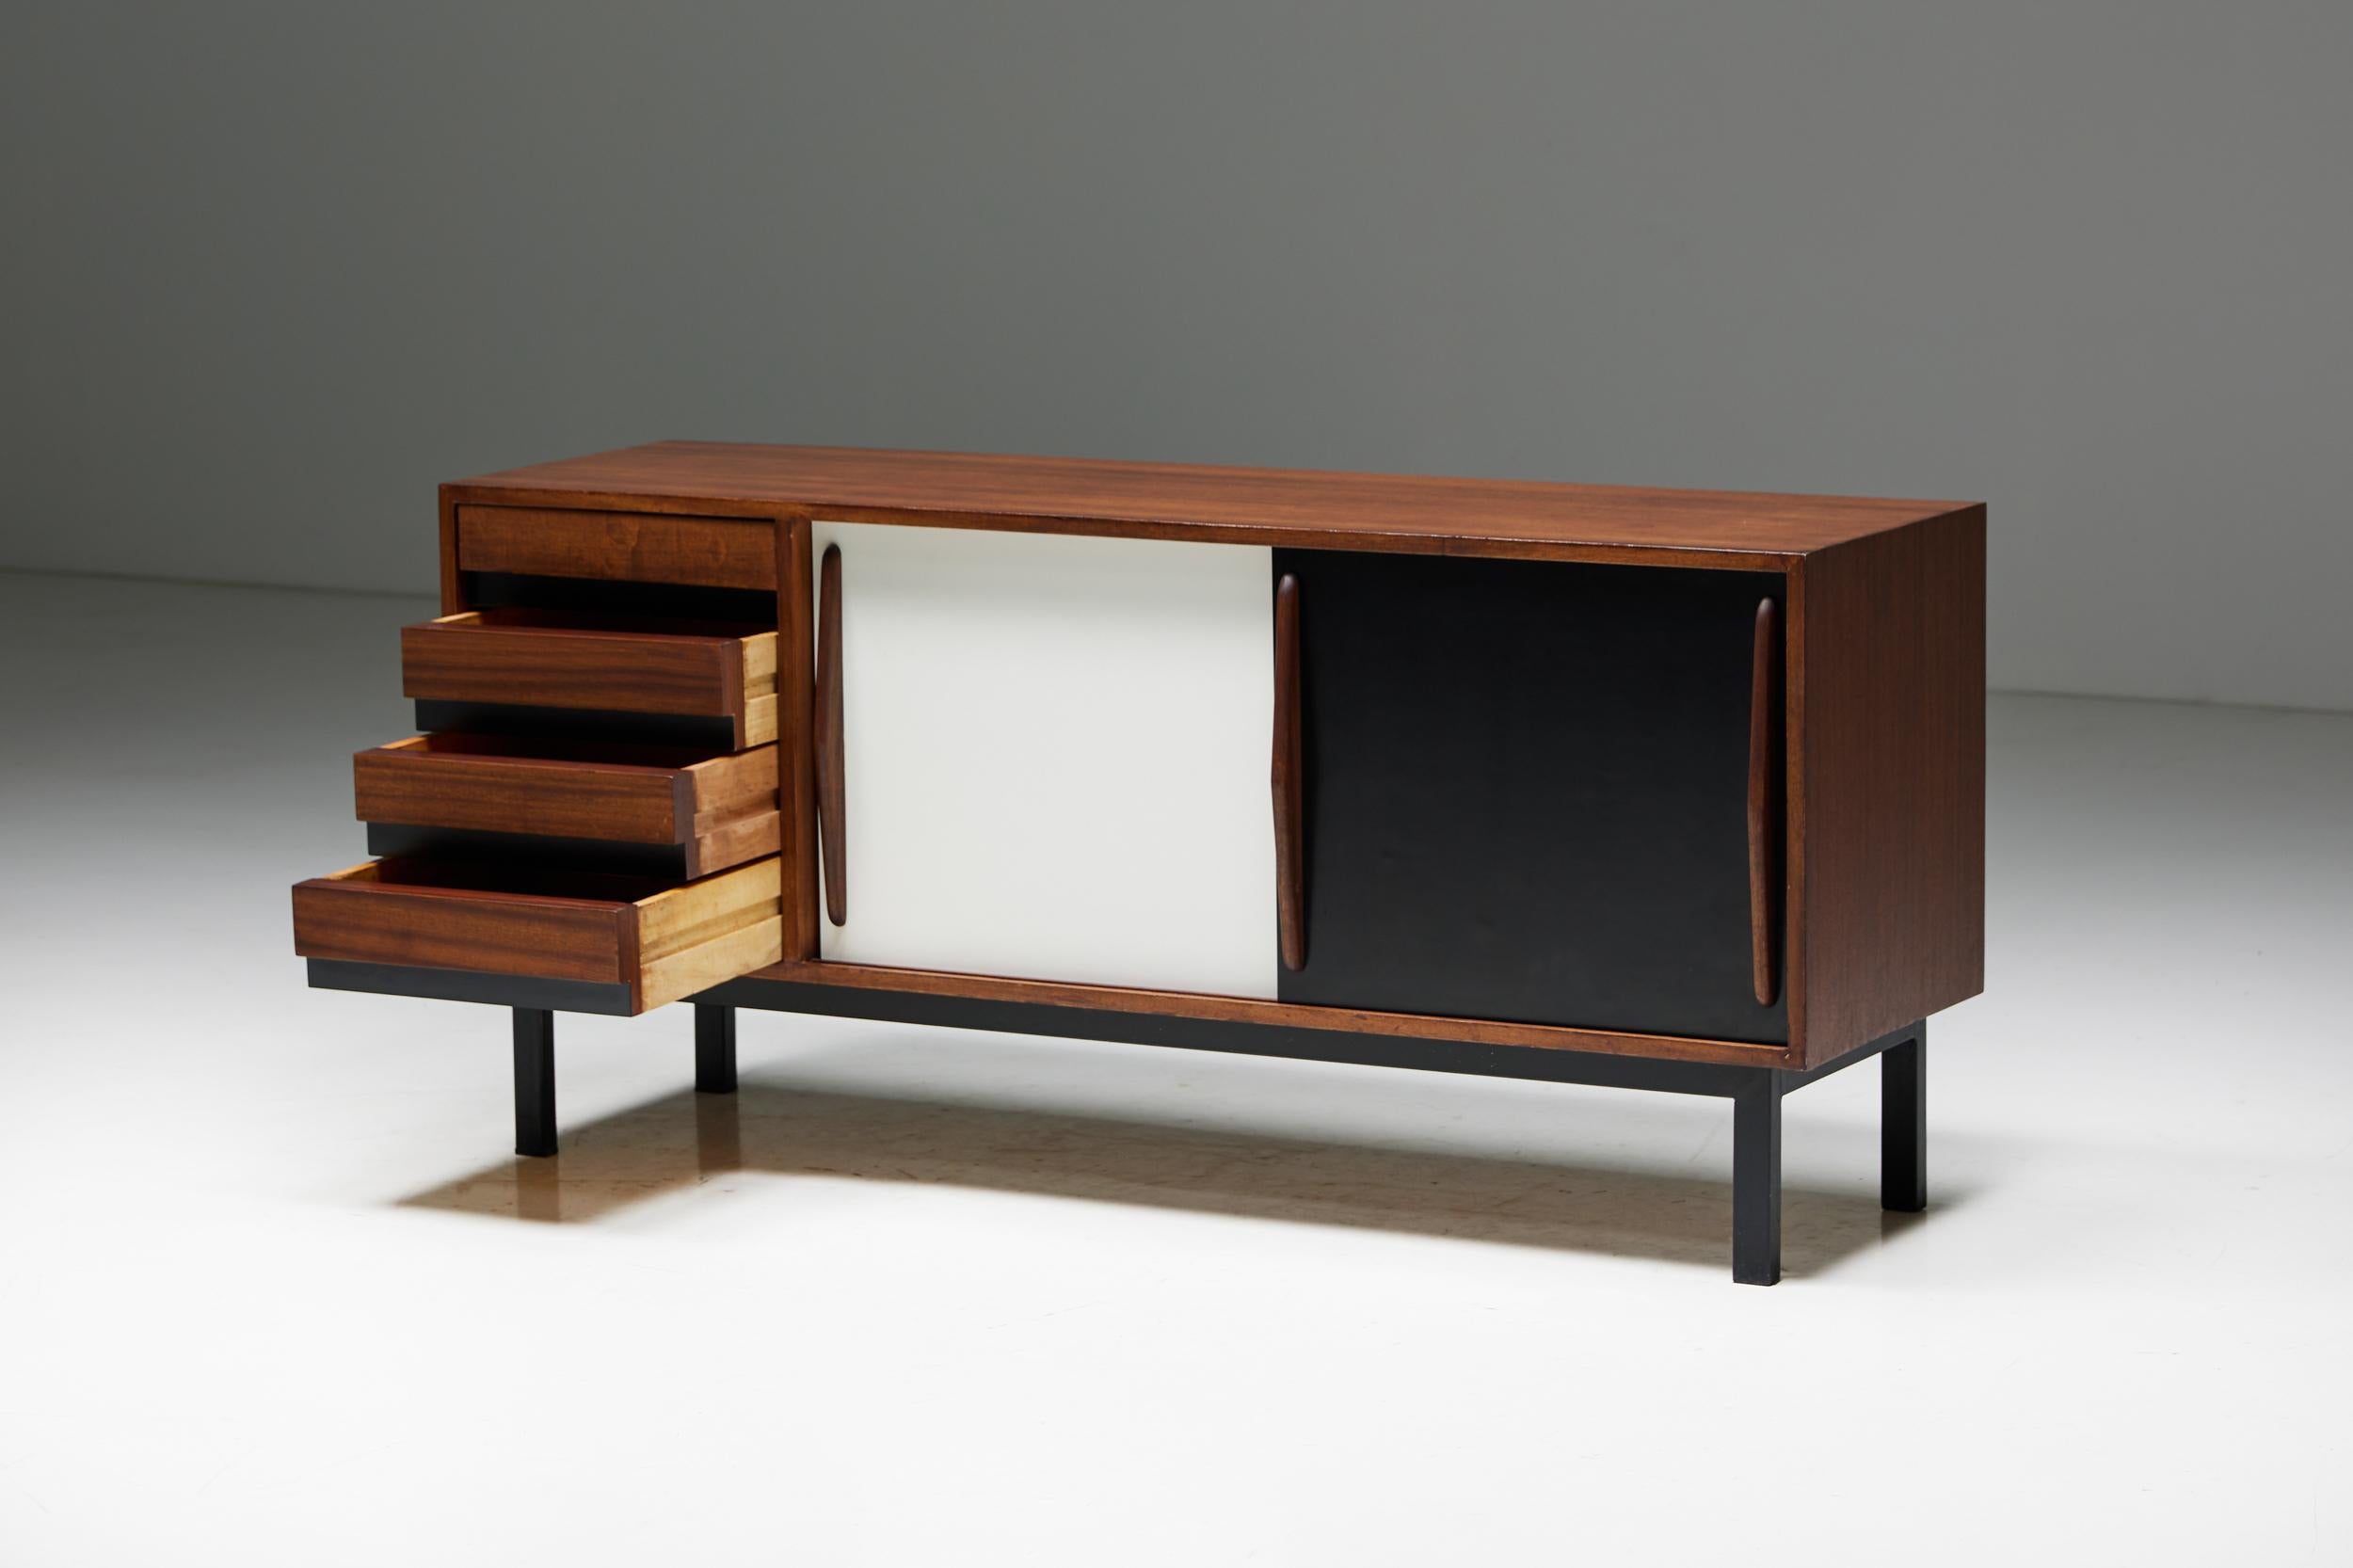 Wood 'Cansado' Sideboard by Charlotte Perriand for Steph Simon, France, 1950s For Sale